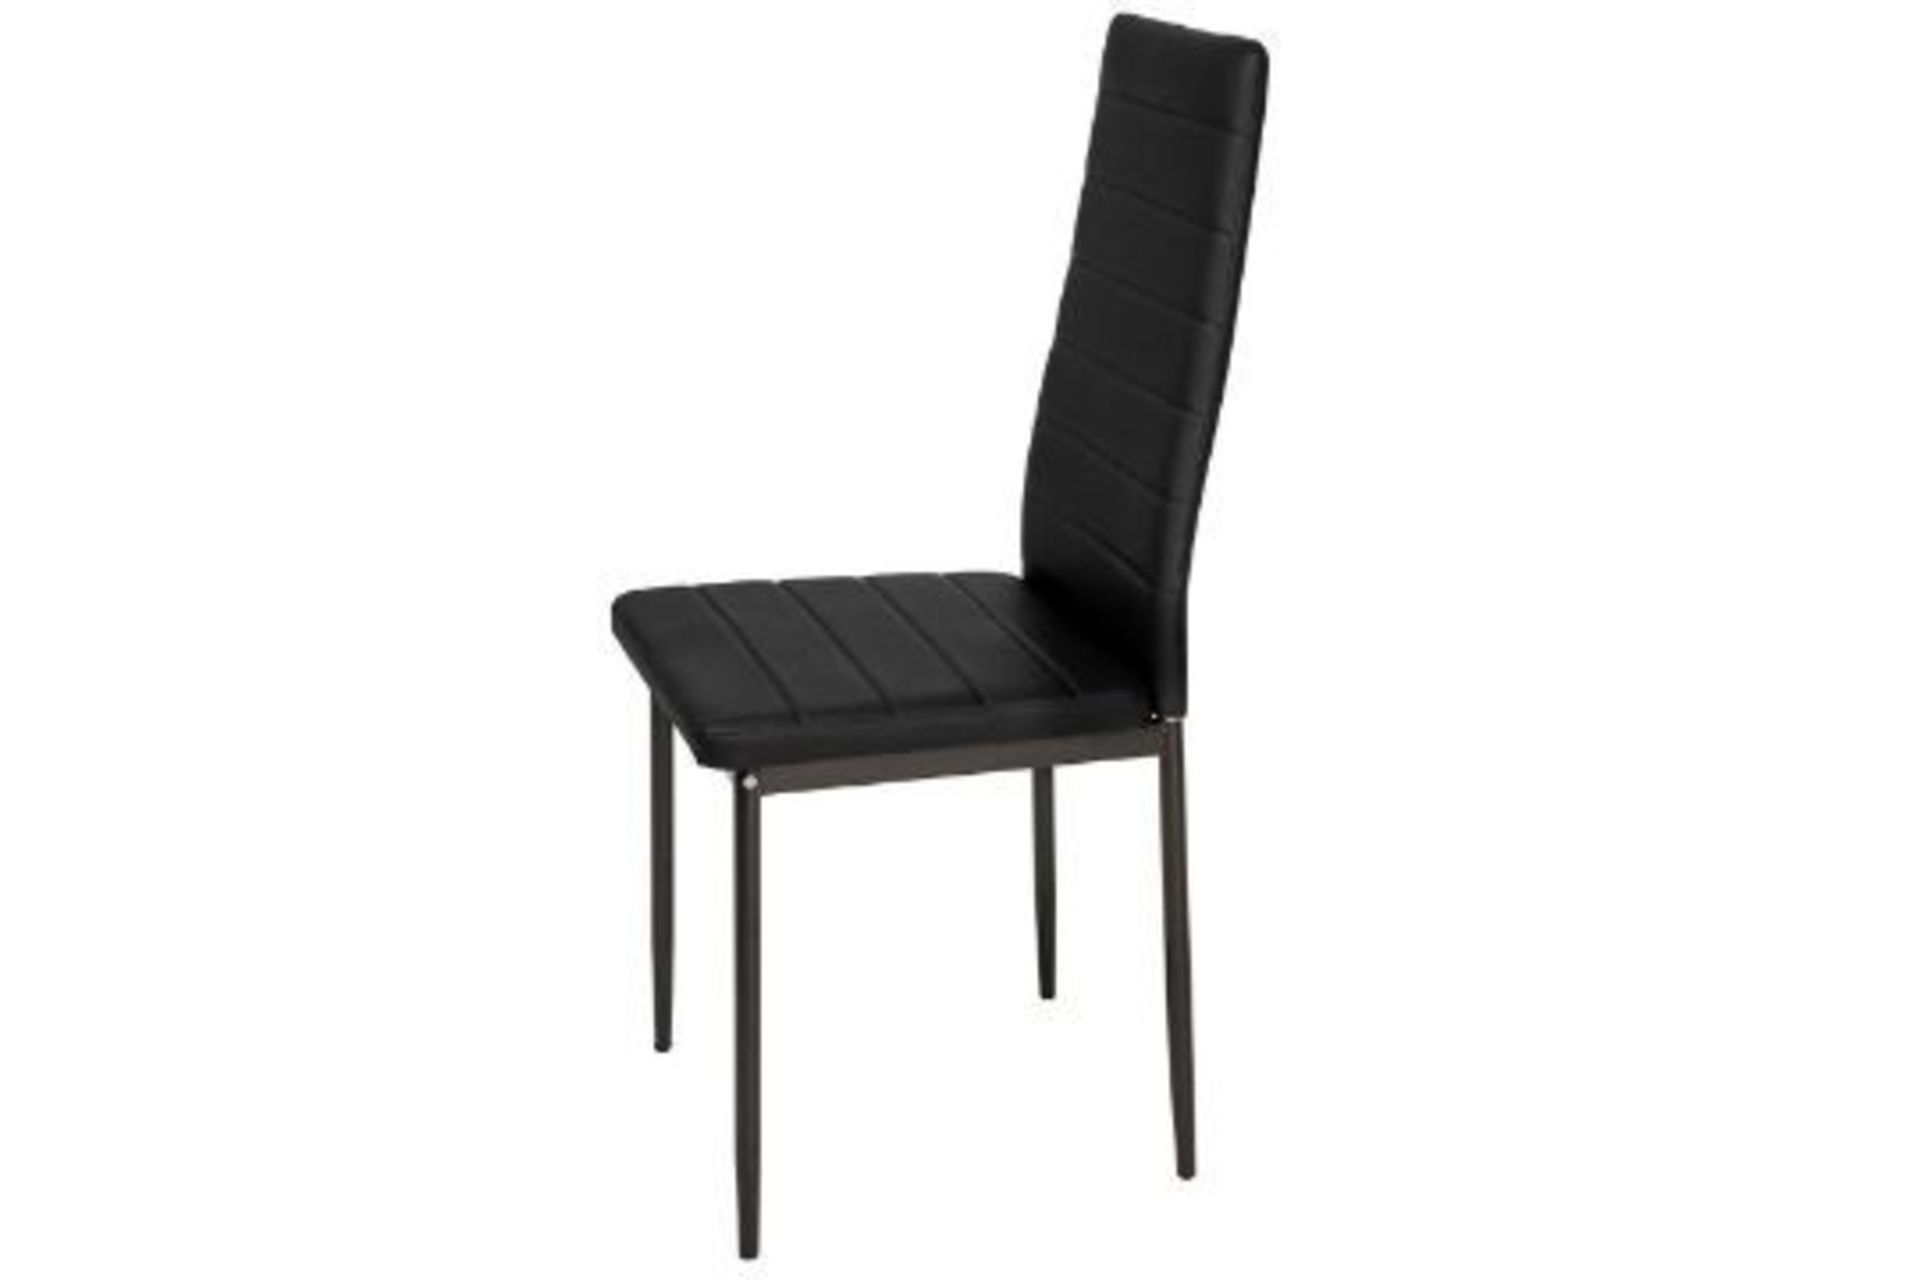 4 X NEW BOXED Modern Synthetic Leather Dining Chairs In Black. RRP £99.99 each, giving this lot a - Image 3 of 6